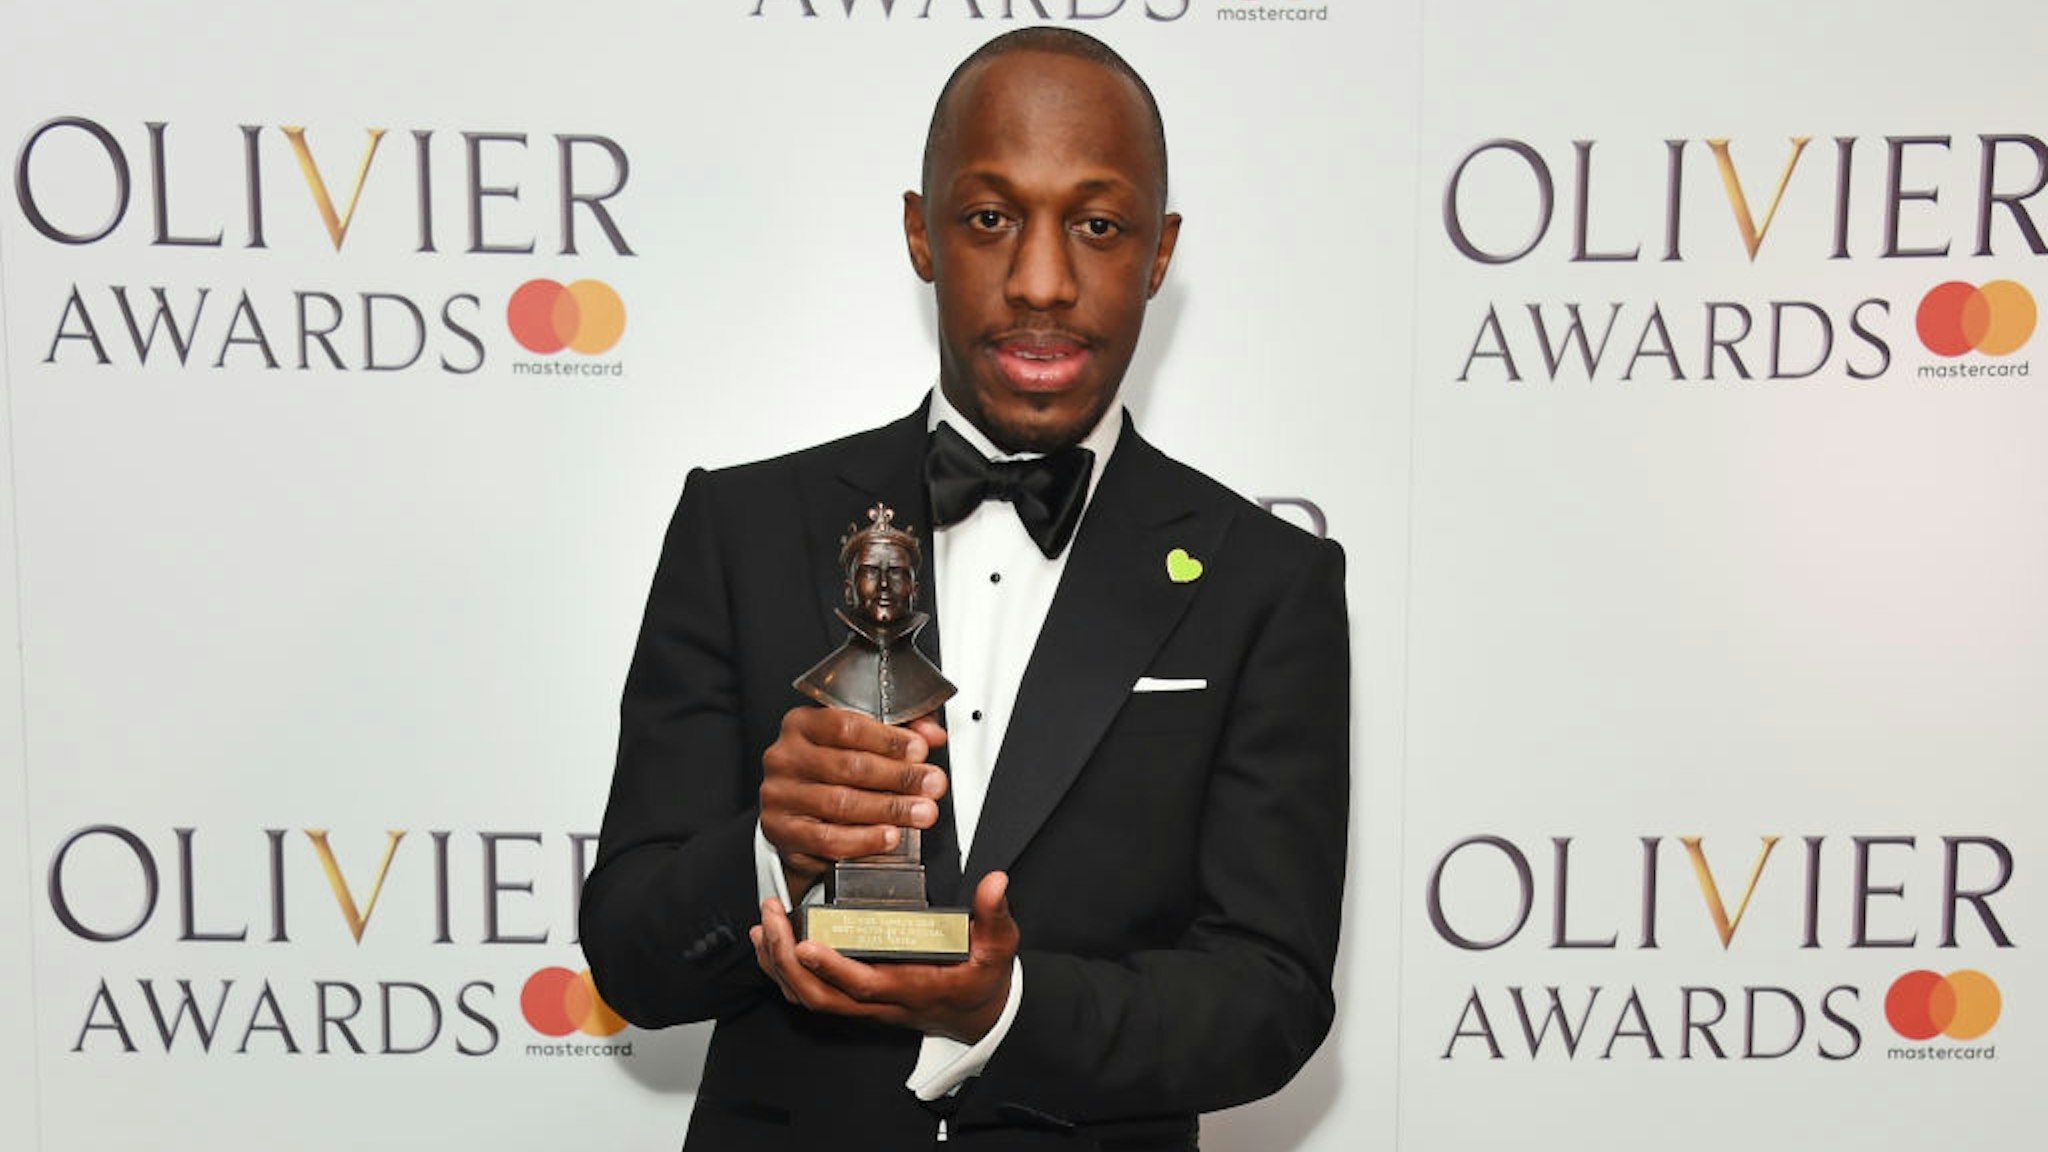 Giles Terera, winner of the Best Actor in a Musical award for "Hamilton", poses in the press room during The Olivier Awards with Mastercard at Royal Albert Hall on April 8, 2018 in London, England.